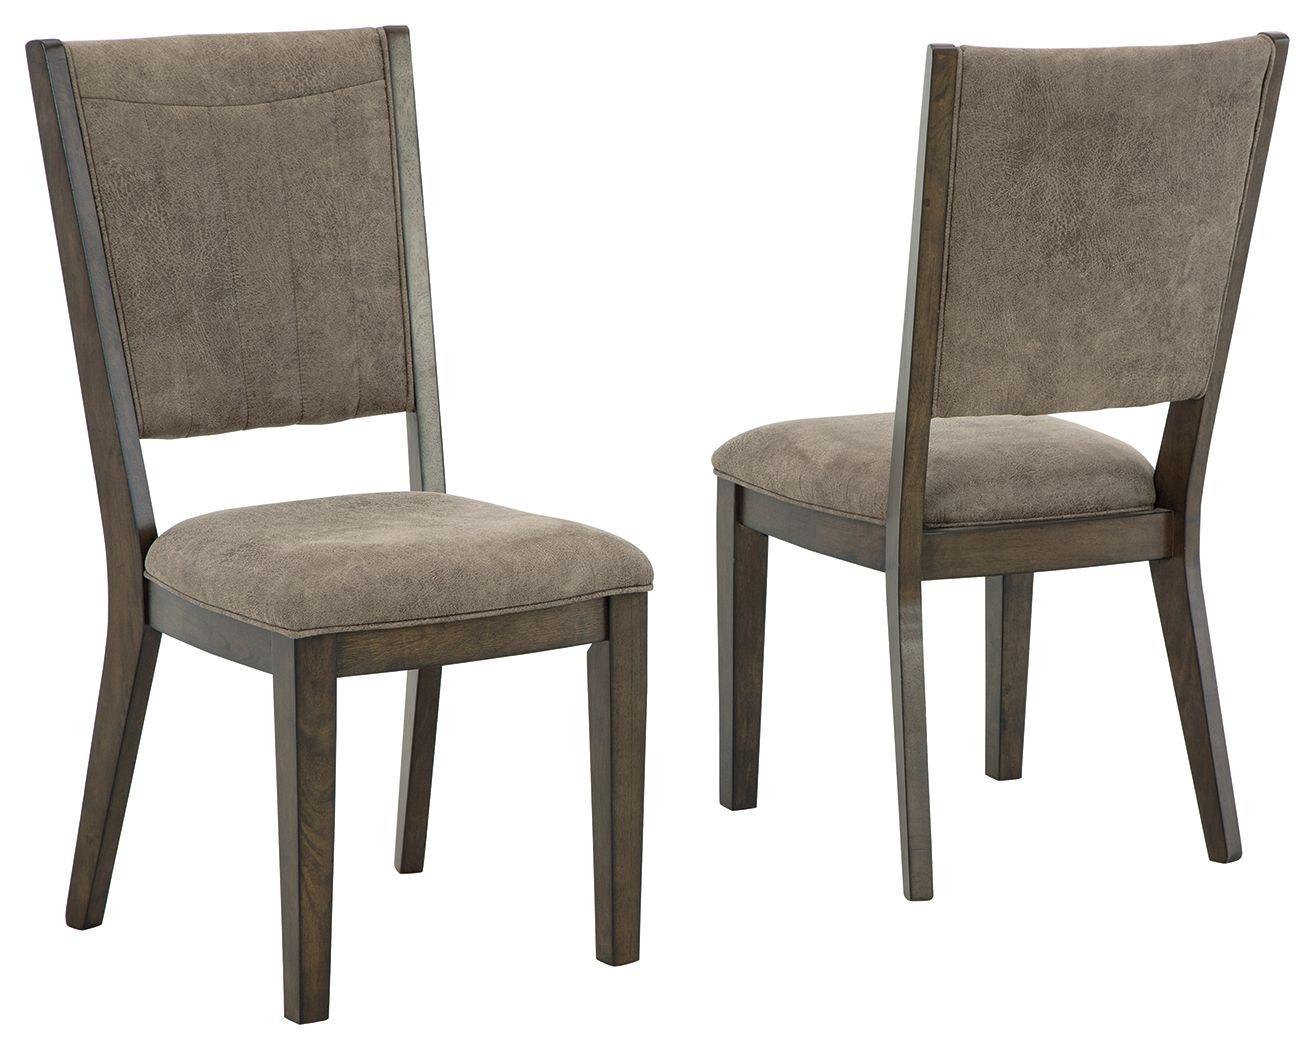 Signature Design by Ashley® - Wittland - Dark Brown - Dining Uph Side Chair (Set of 2) - 5th Avenue Furniture